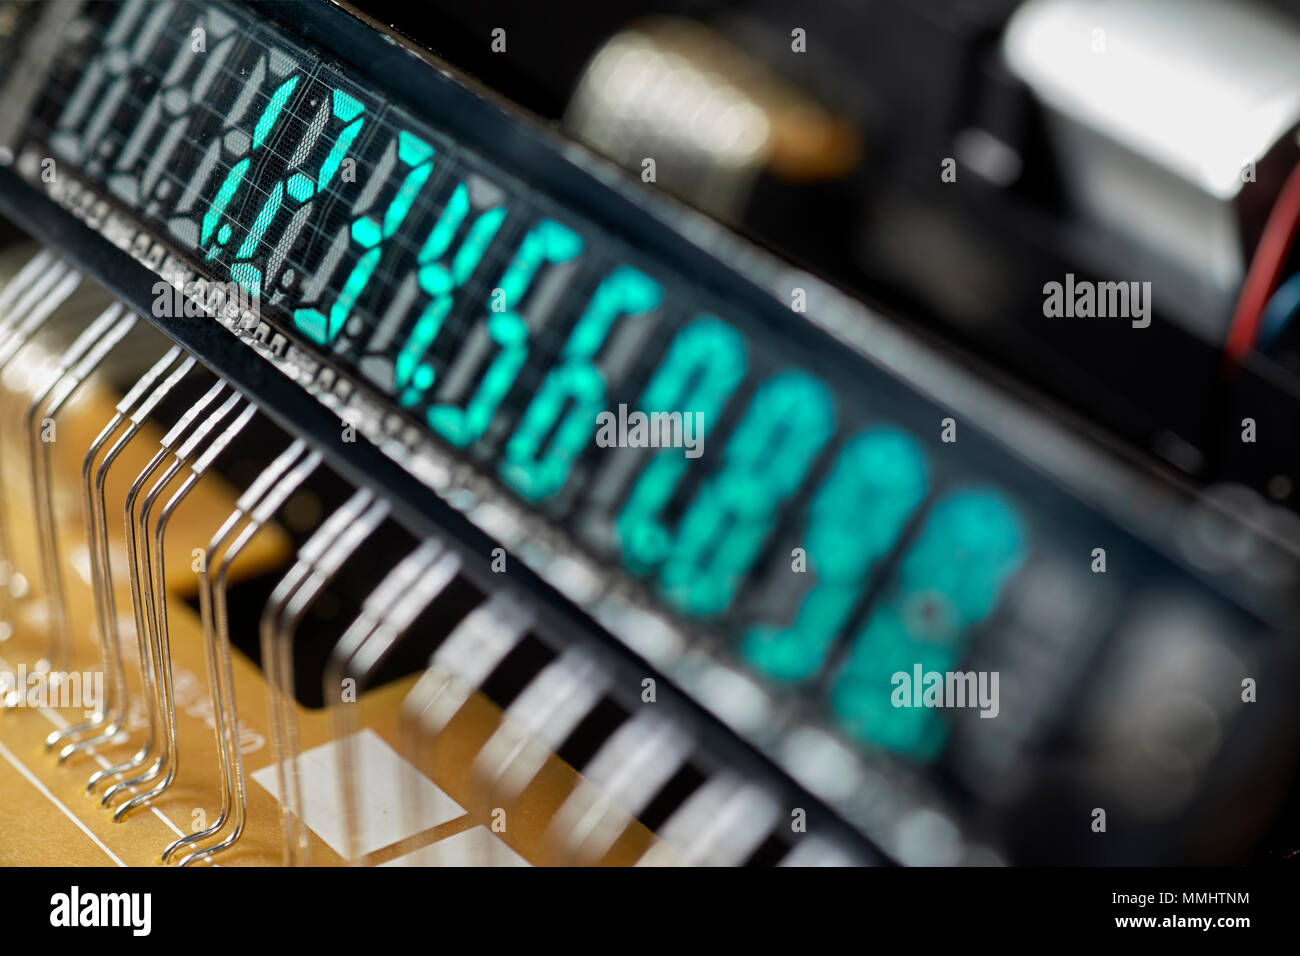 Detail of calculator with Vacuum Fluorescent Display Stock Photo